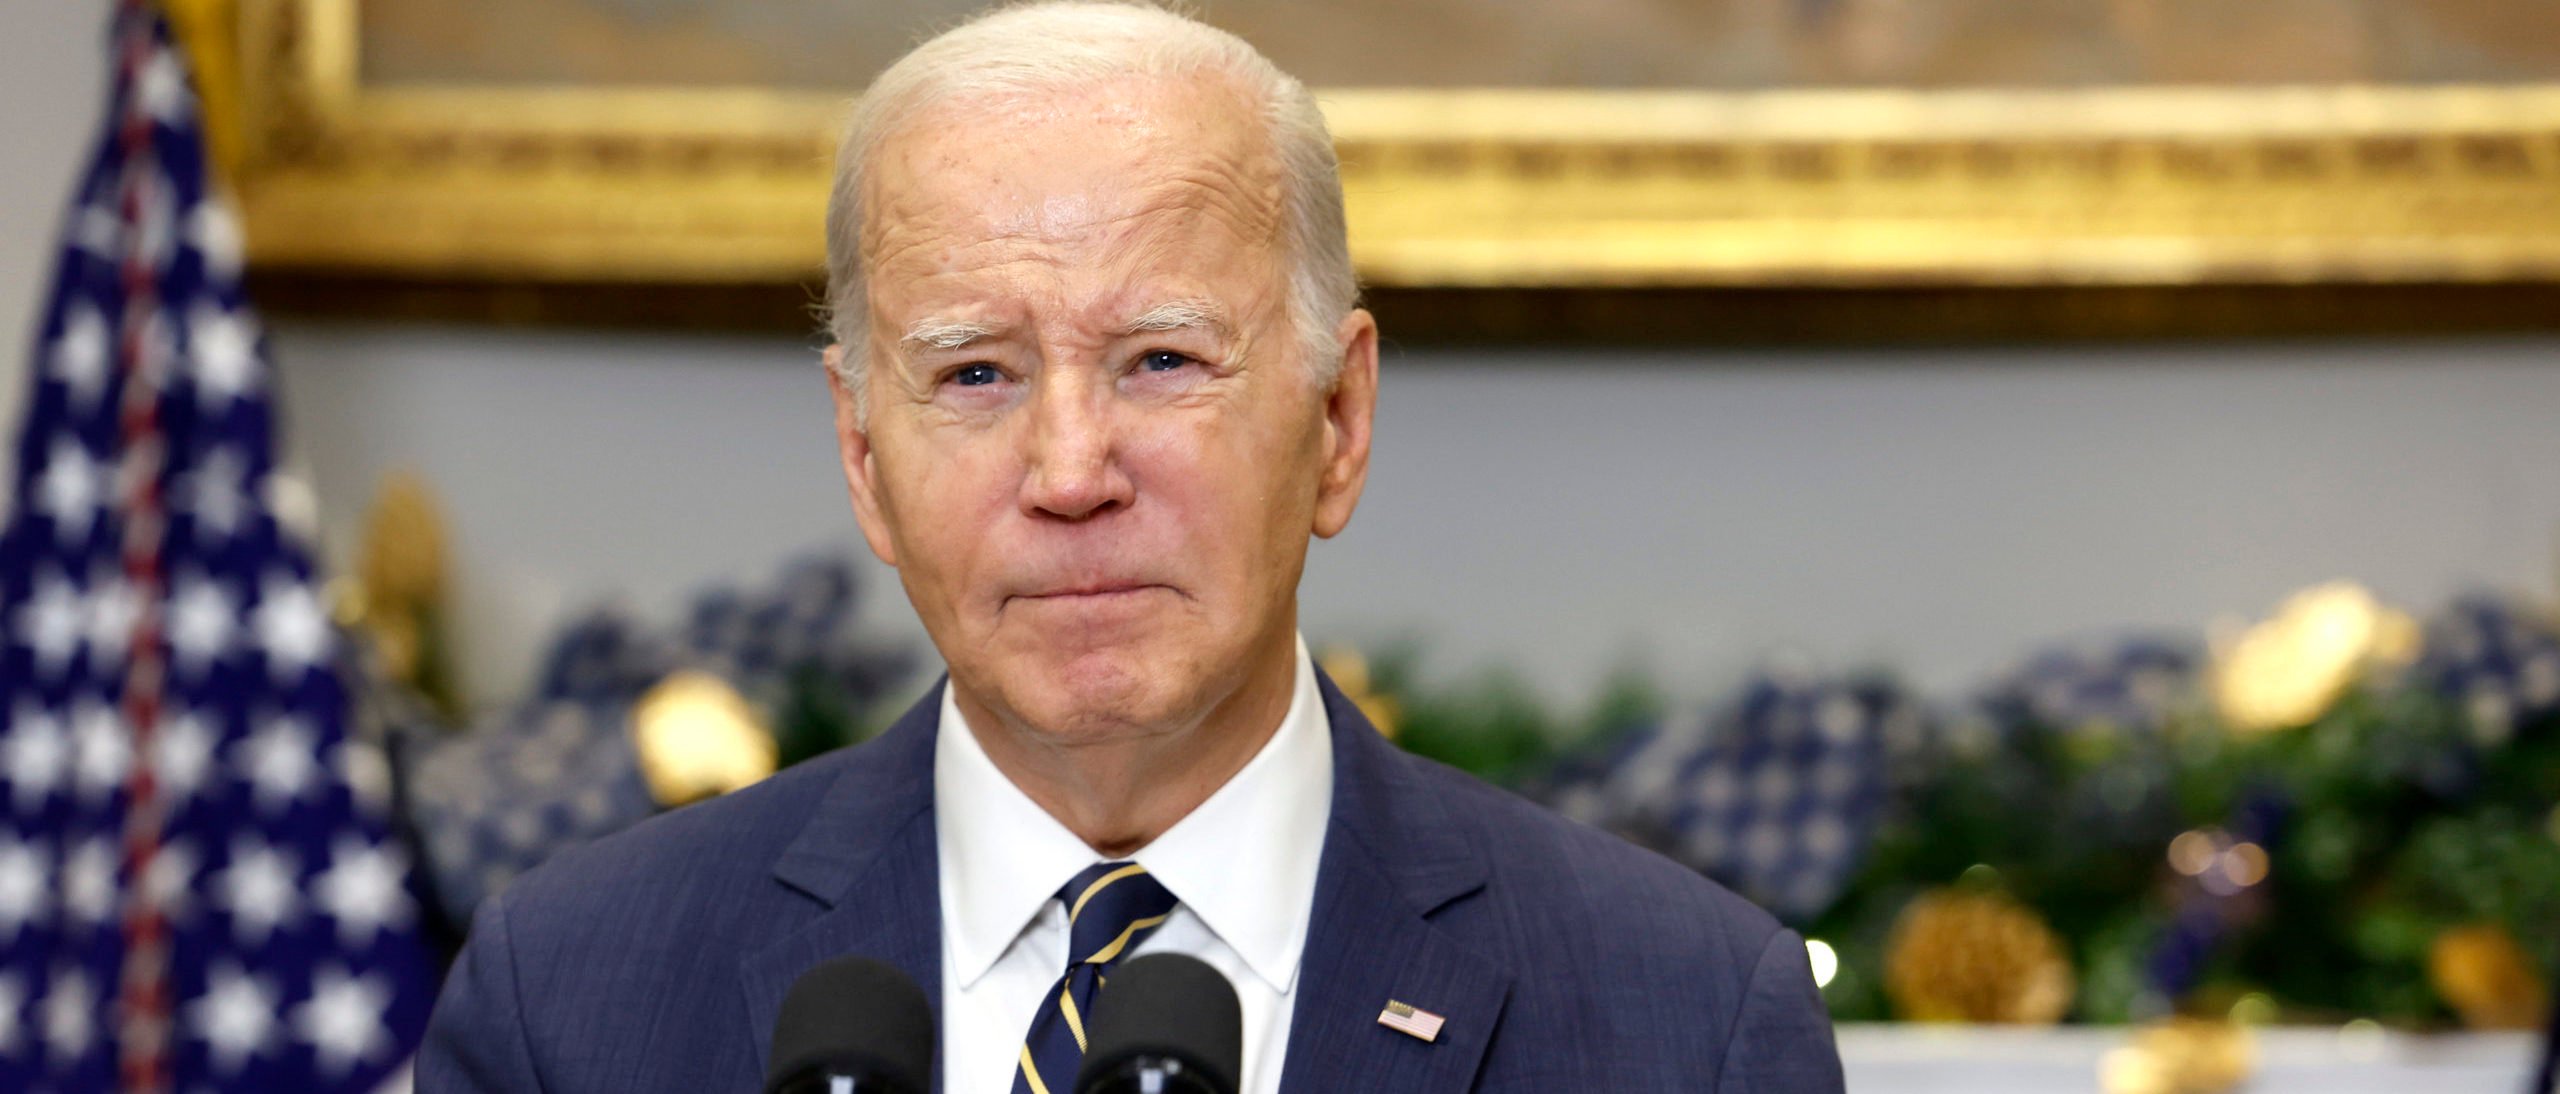 Biden Admin Planning Major Weapons Transfer To Israel Amid Cease-fire Calls: REPORT